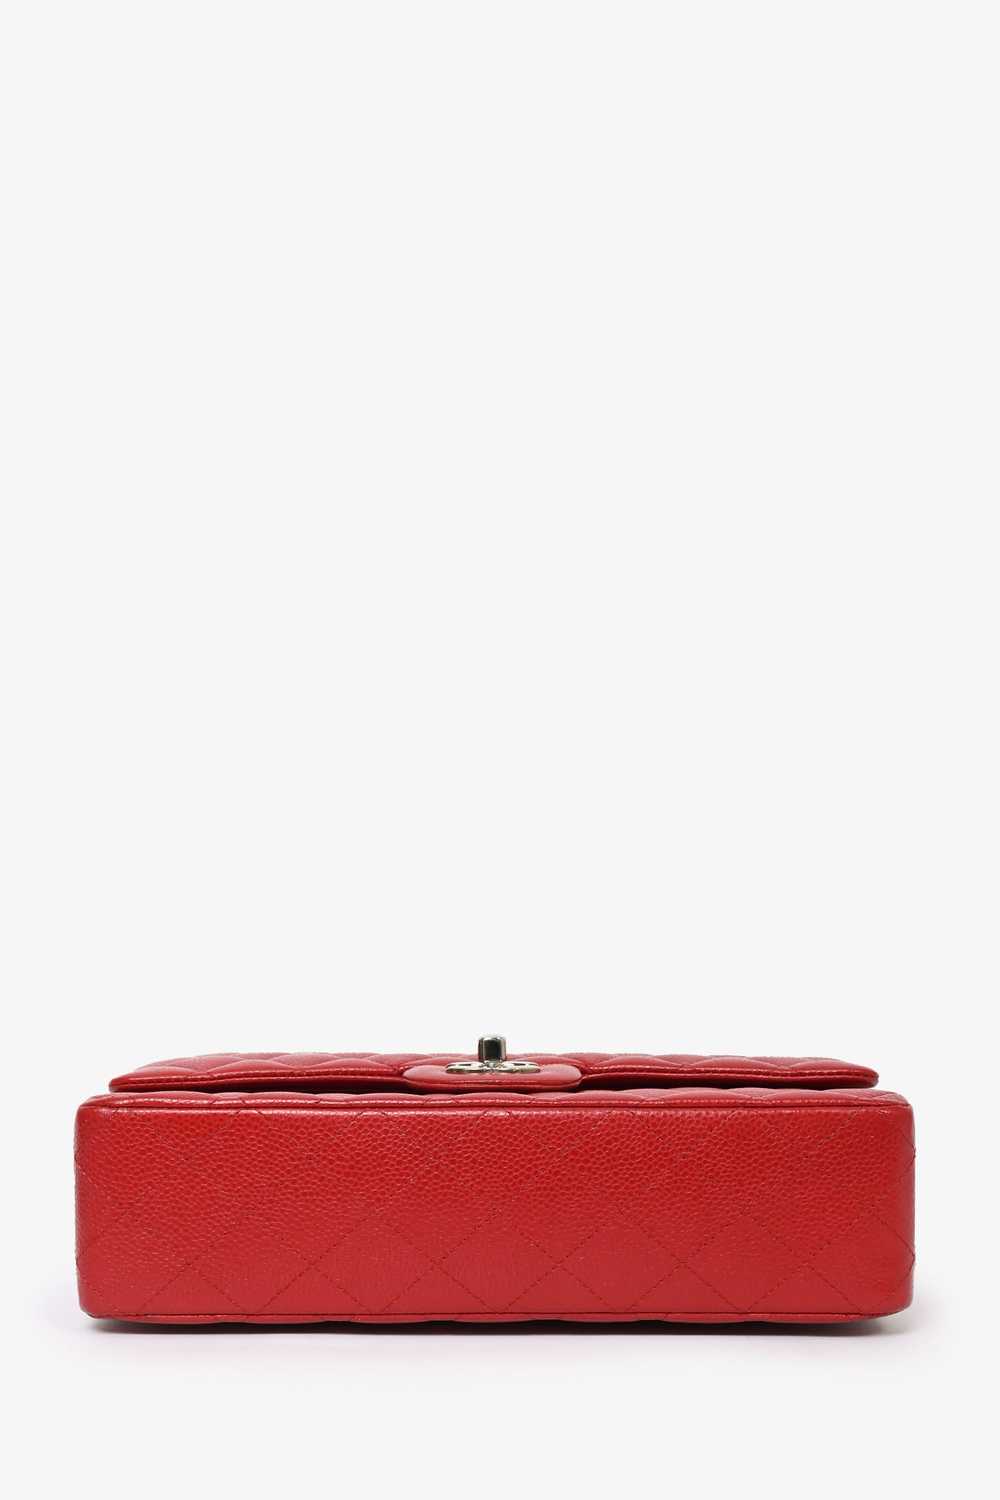 Pre-loved Chanel™ 2011 Red Caviar Leather Medium … - image 7